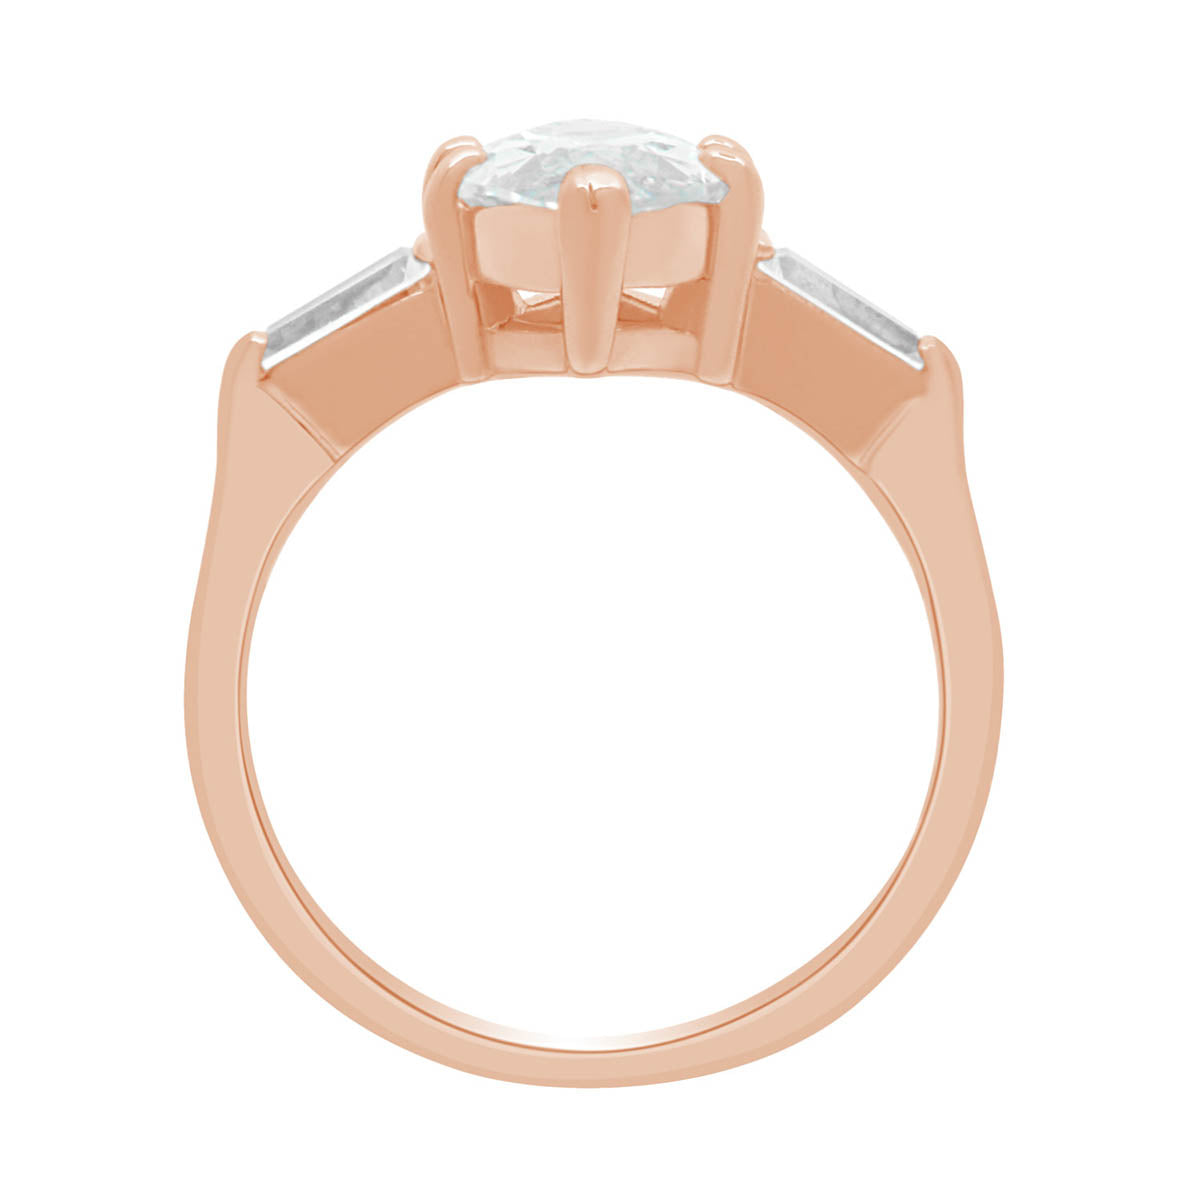 Marquise with Baguettes Diamond Ring in rosegold standing upright